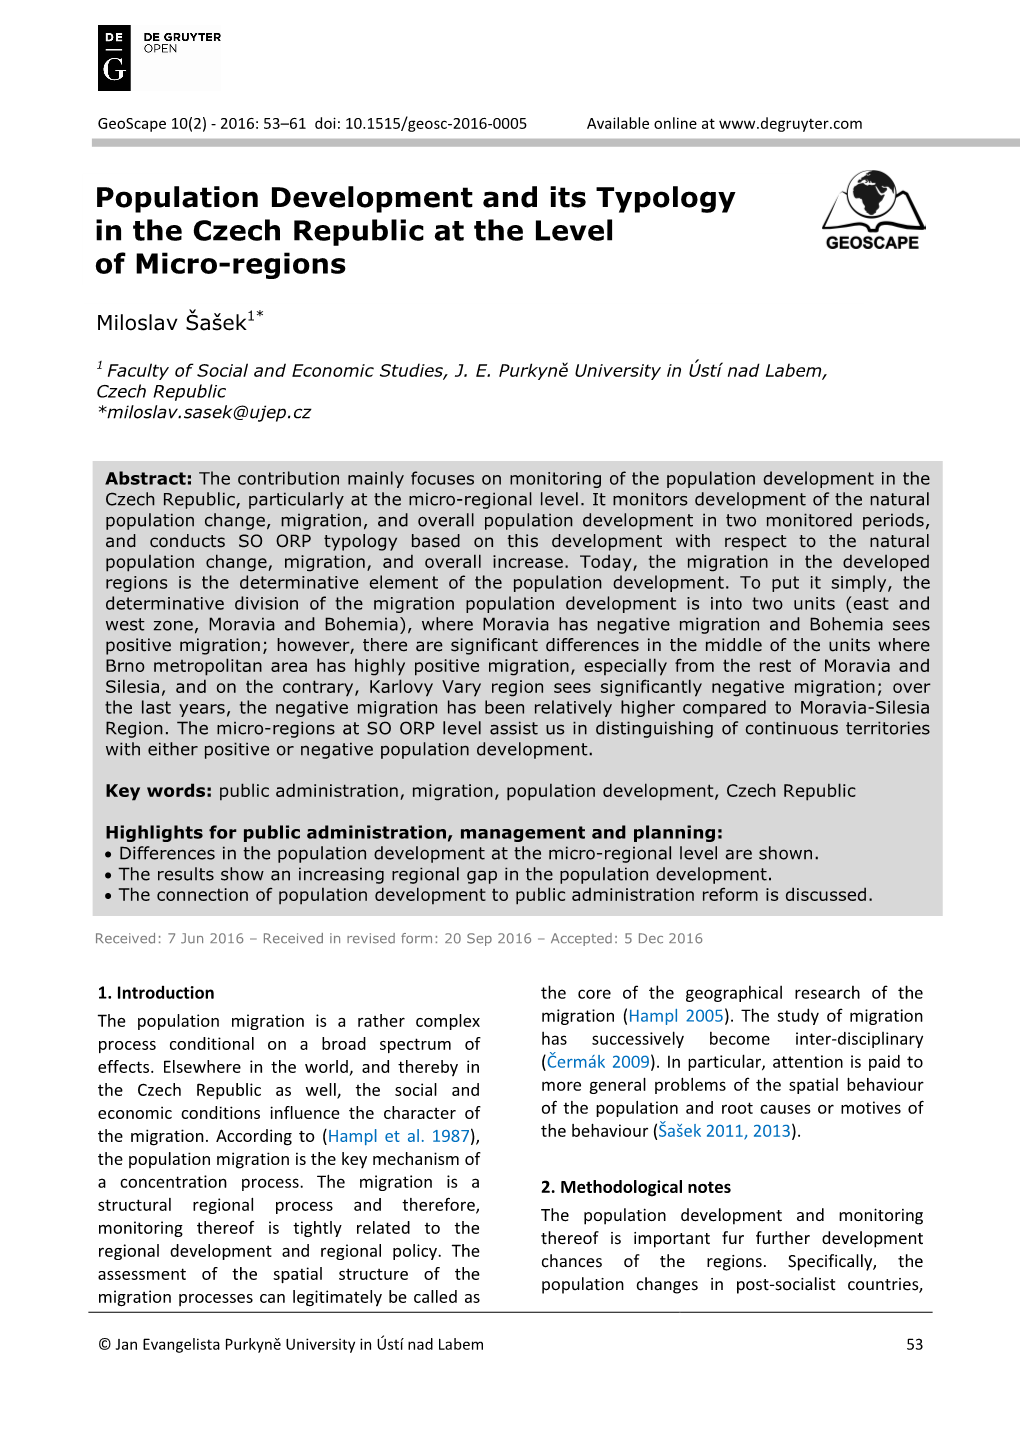 Population Development and Its Typology in the Czech Republic at the Level of Micro-Regions